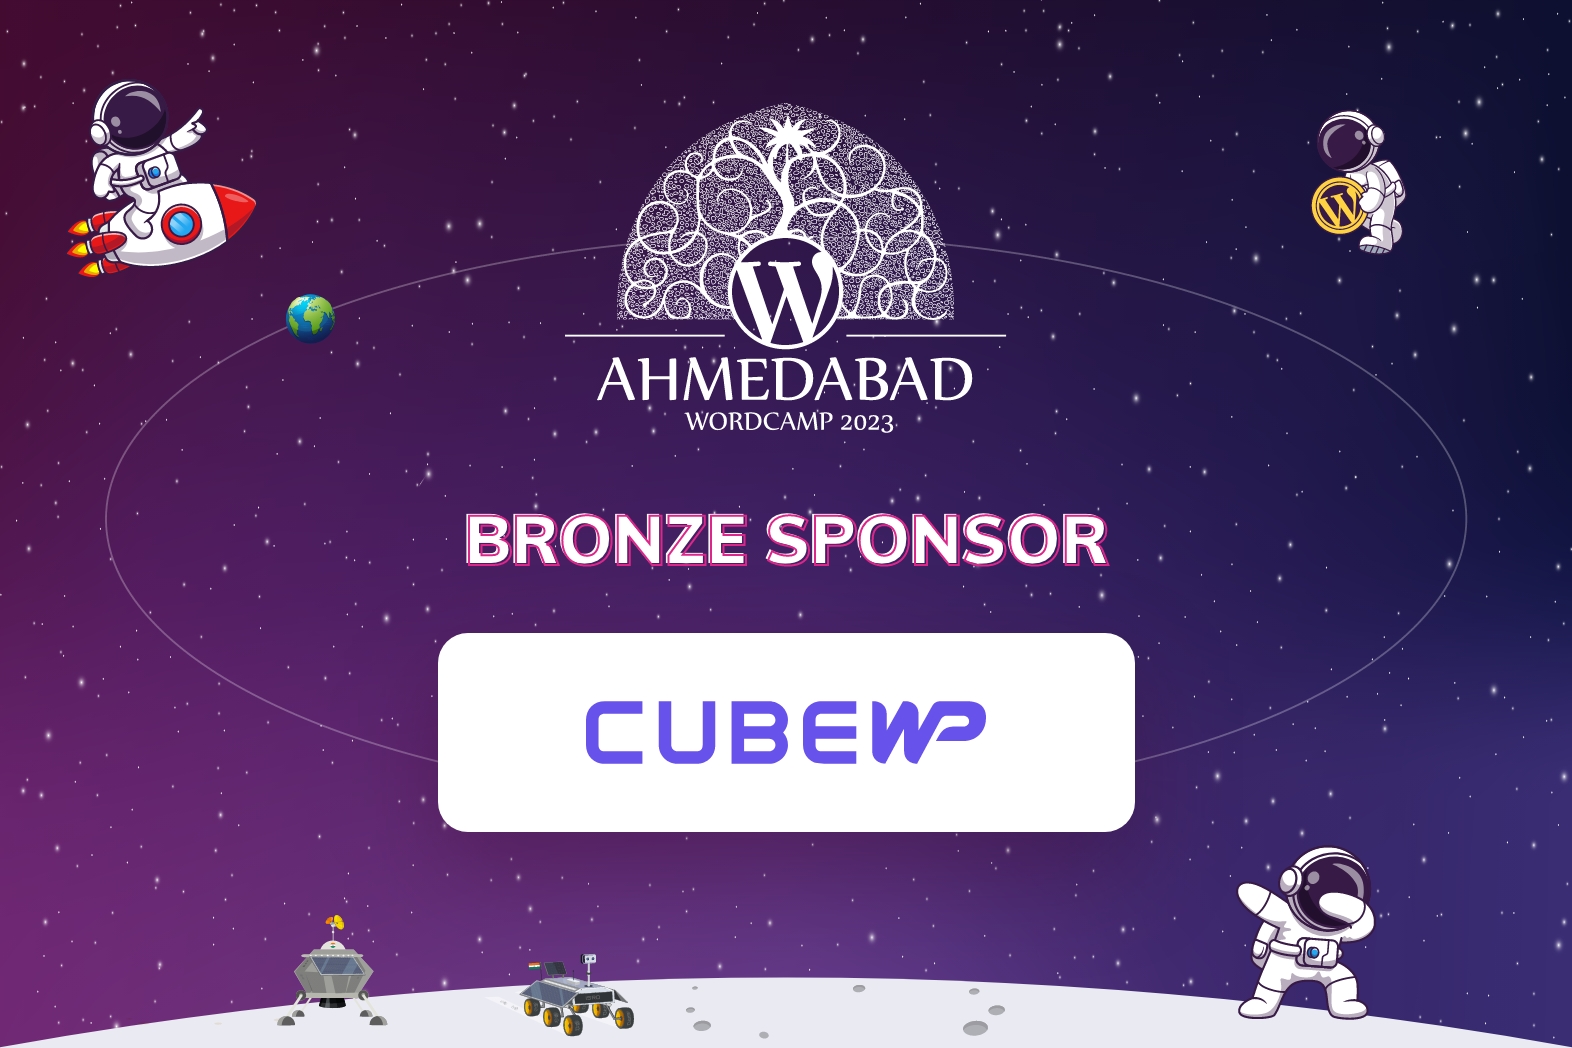 Thank You CubeWP, for being our Bronze Sponsor